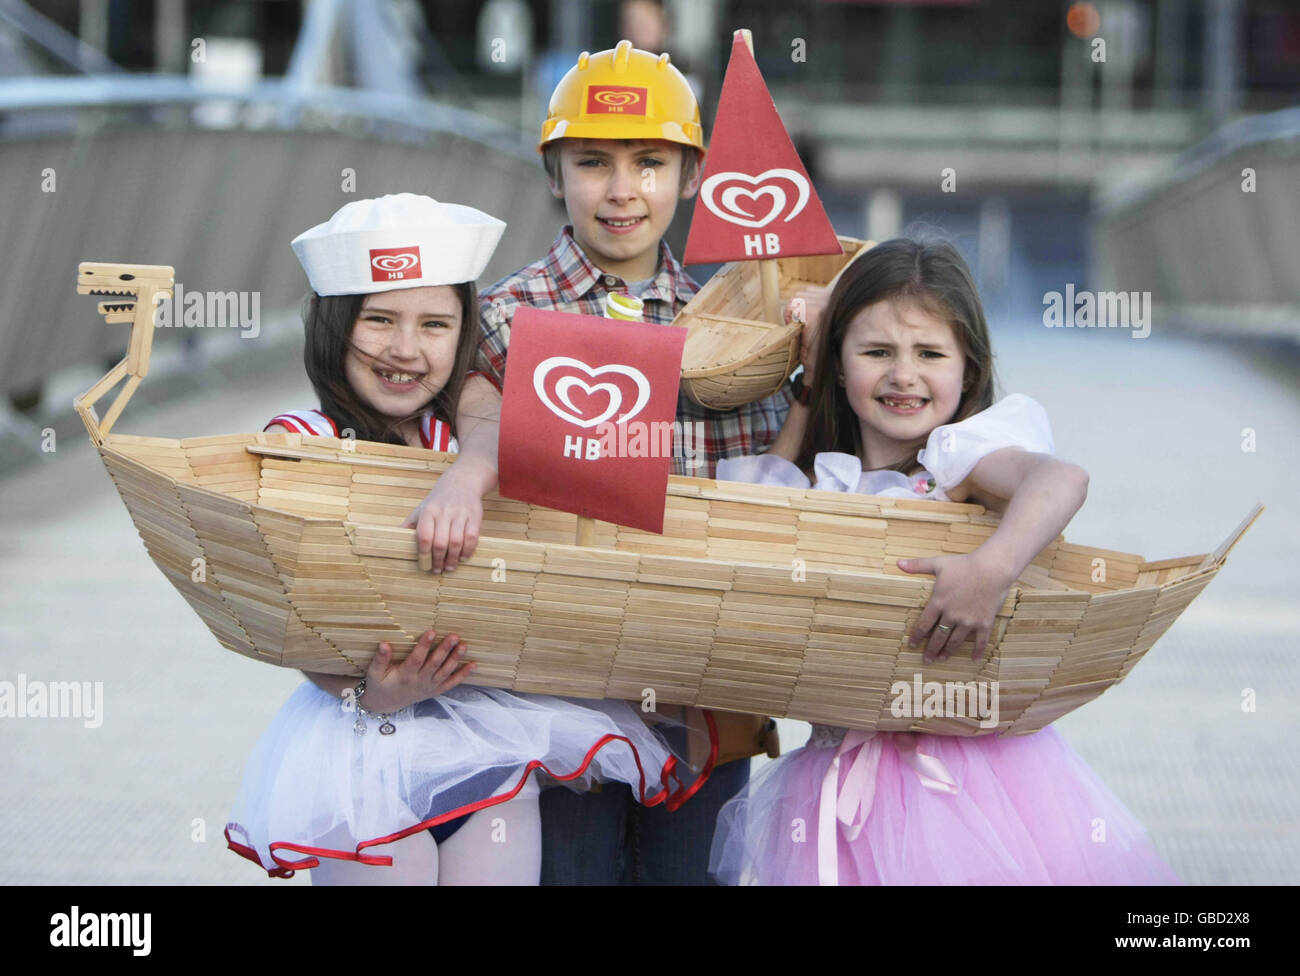 (left to right) Kaitlin Dunne, 8, James Hegart, 9, and Leah Cleer, 7, help launch the HB Let's Sail Competition, as part of the Volvo Ocean Race Galway stopover 2009. Stock Photo